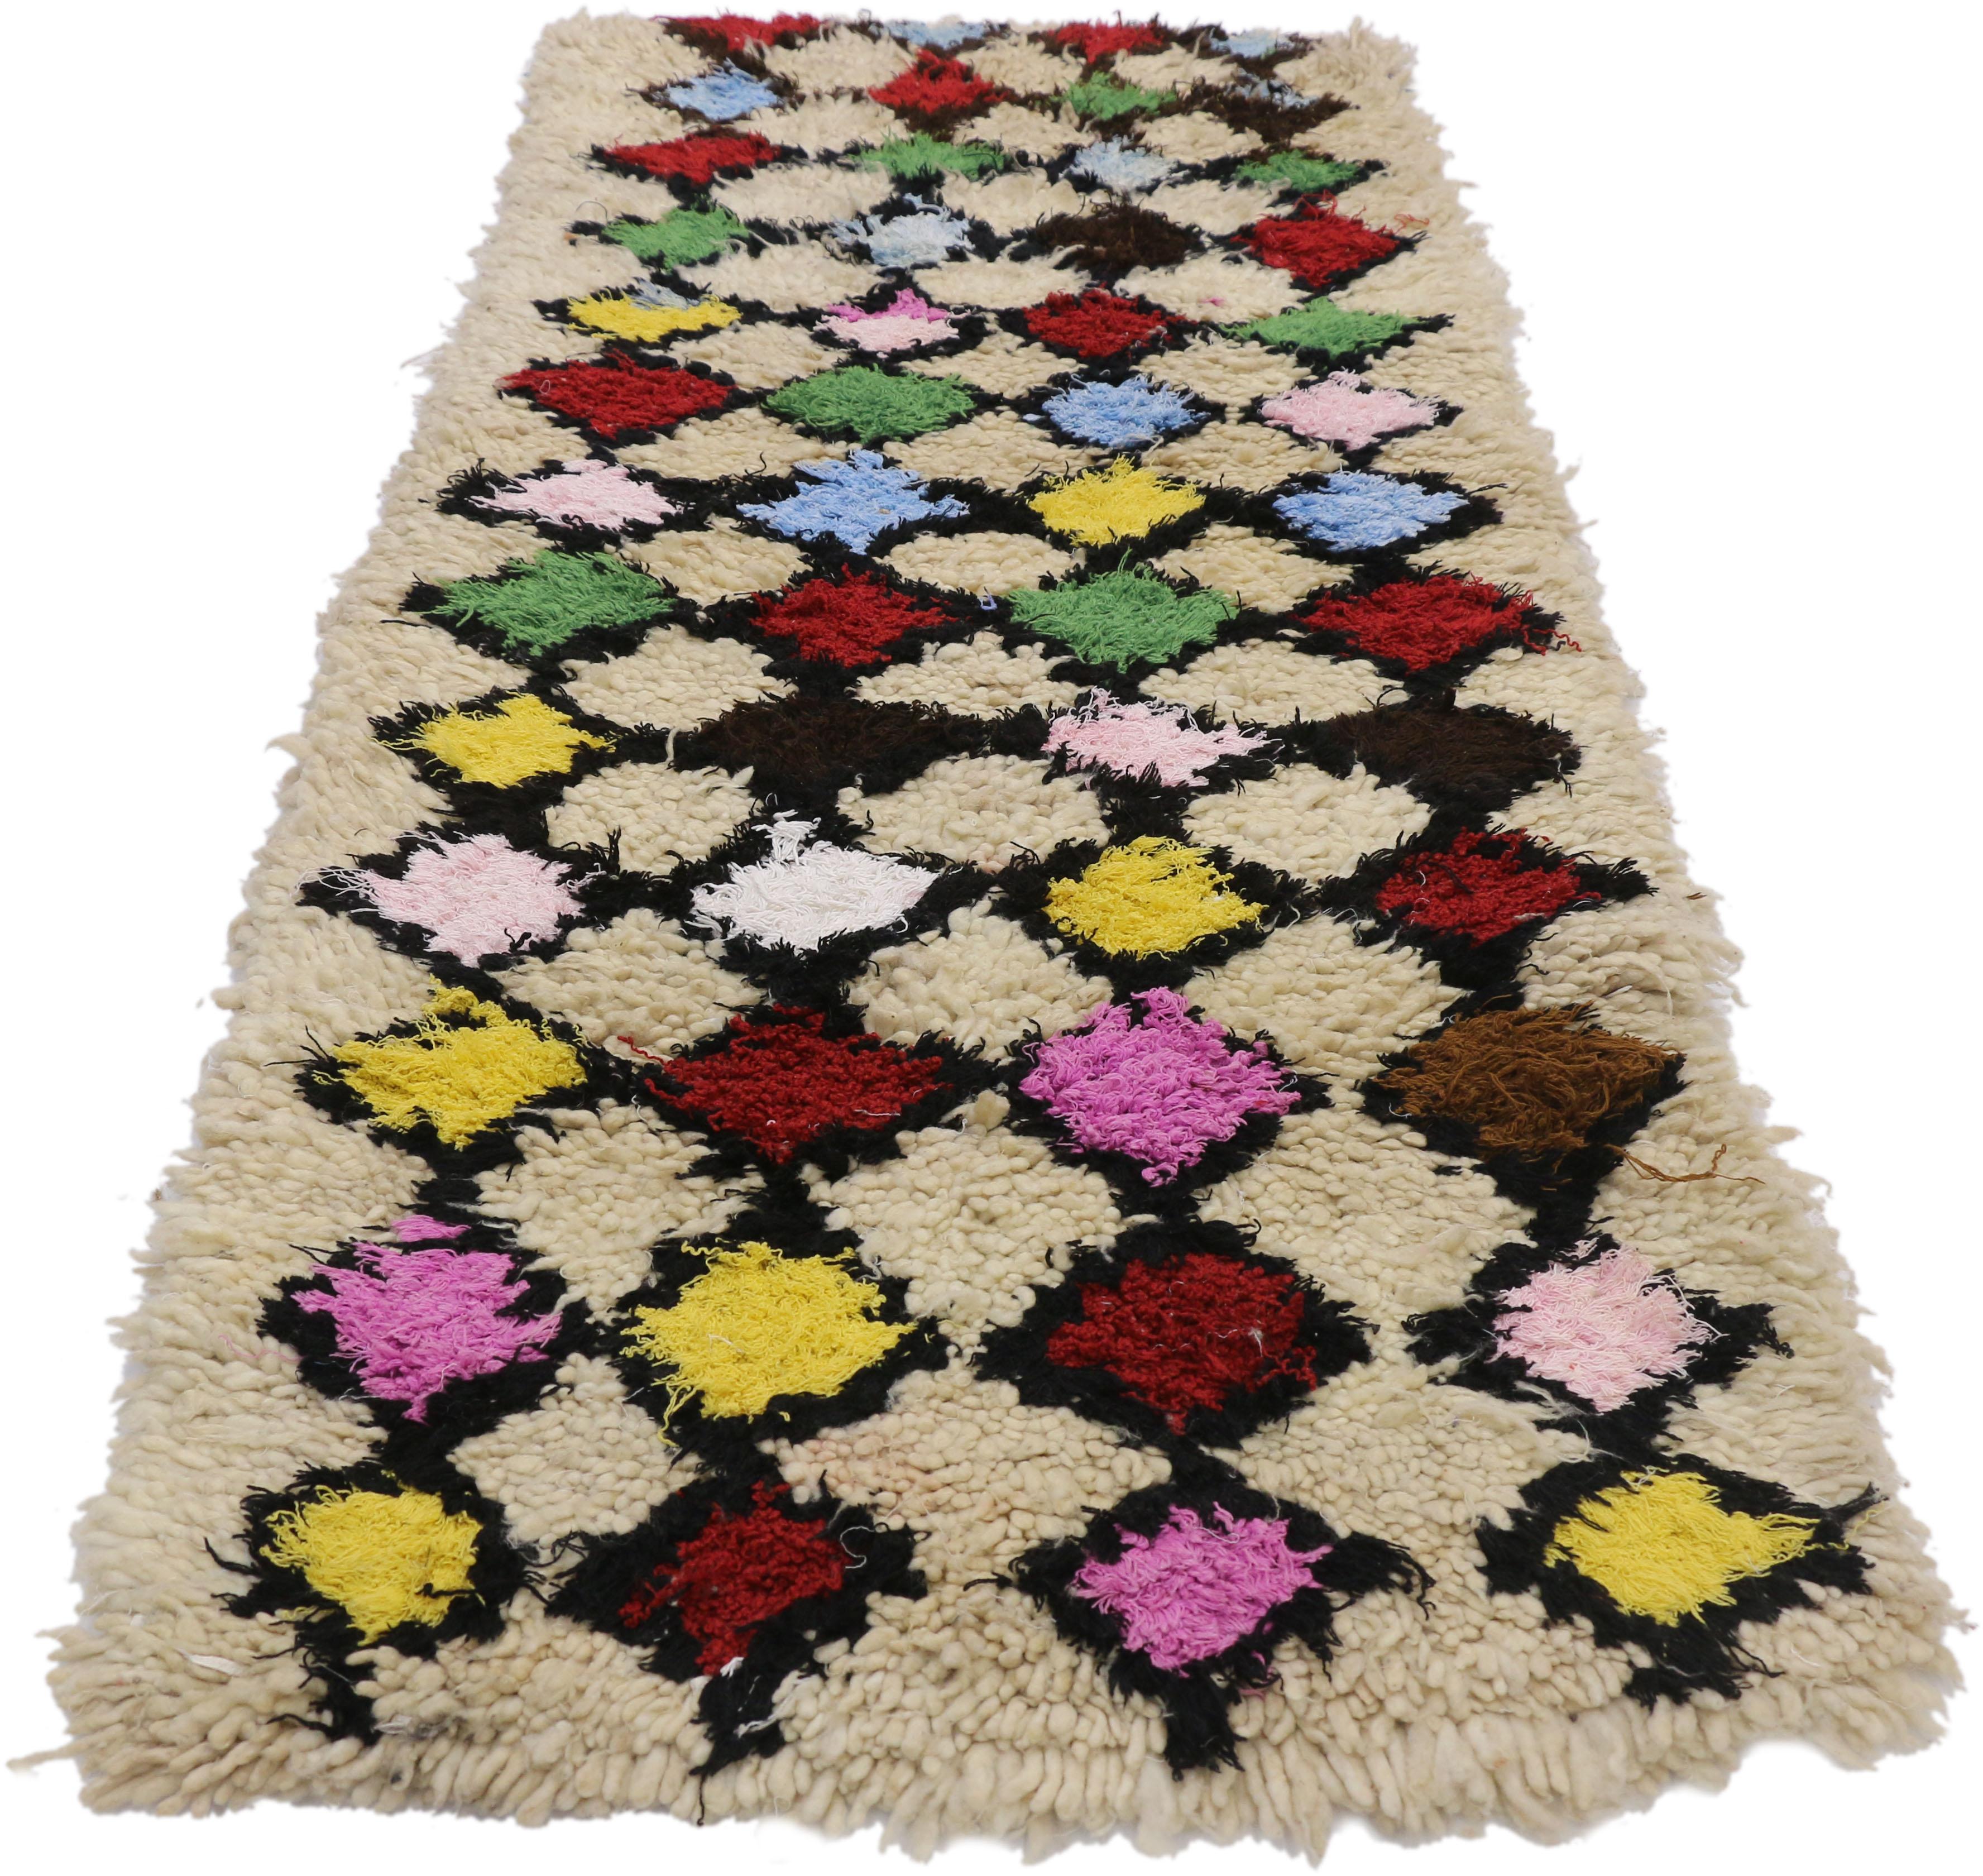 Bohemian Vintage Moroccan Azilal Rug, Berber Colorful Boucherouite Rug with Tribal Style